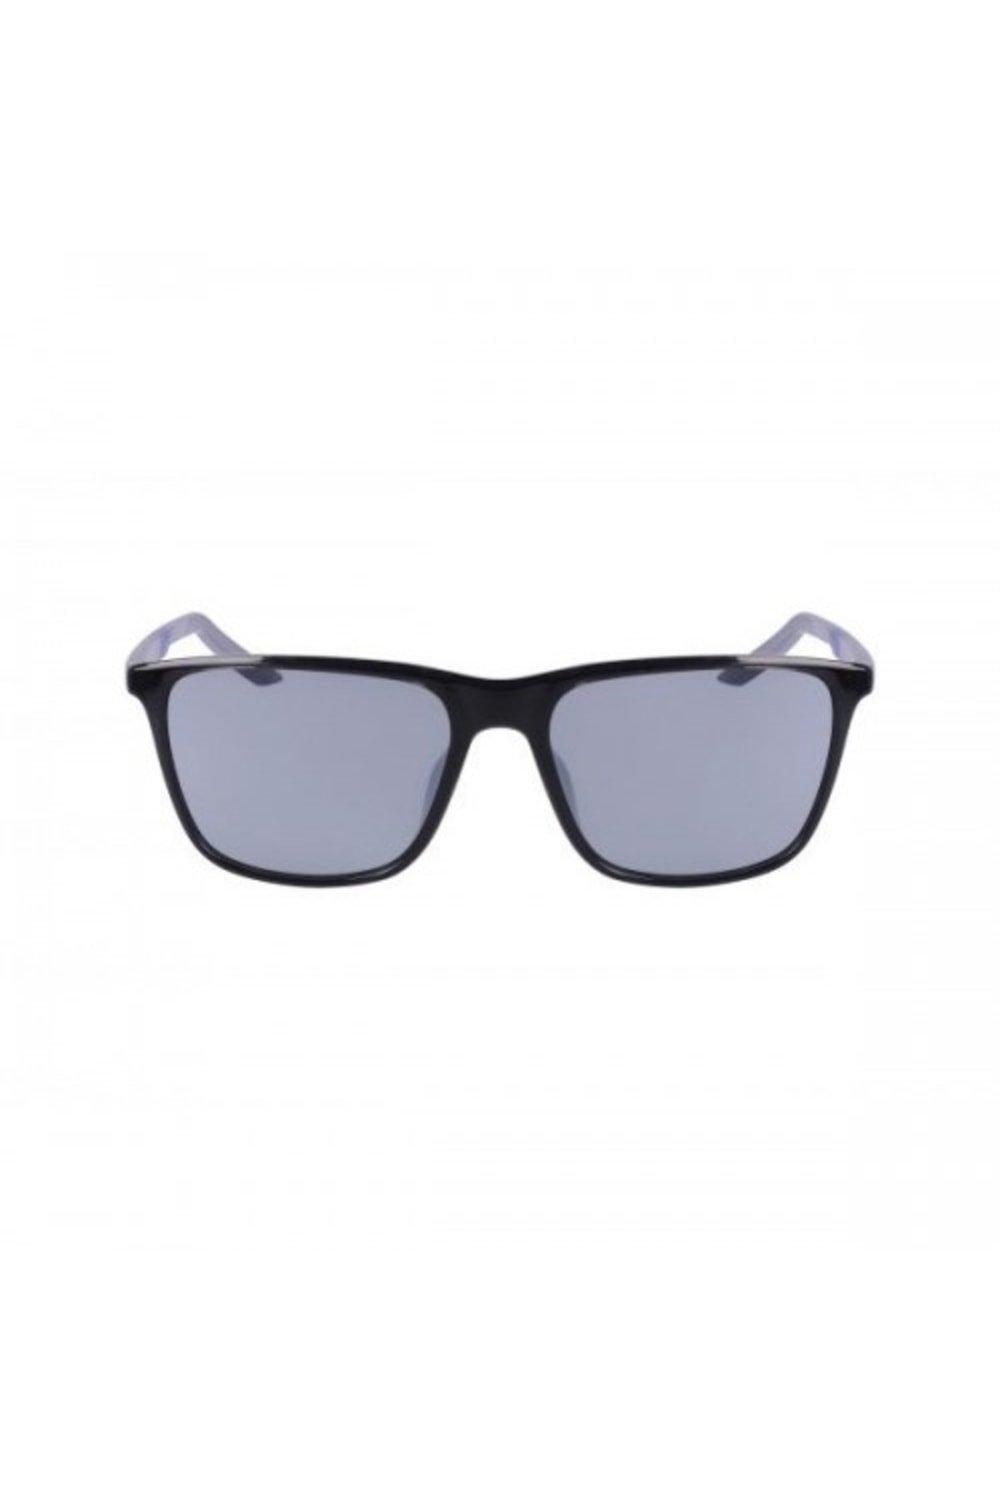 State Anthracite Racer Sunglasses